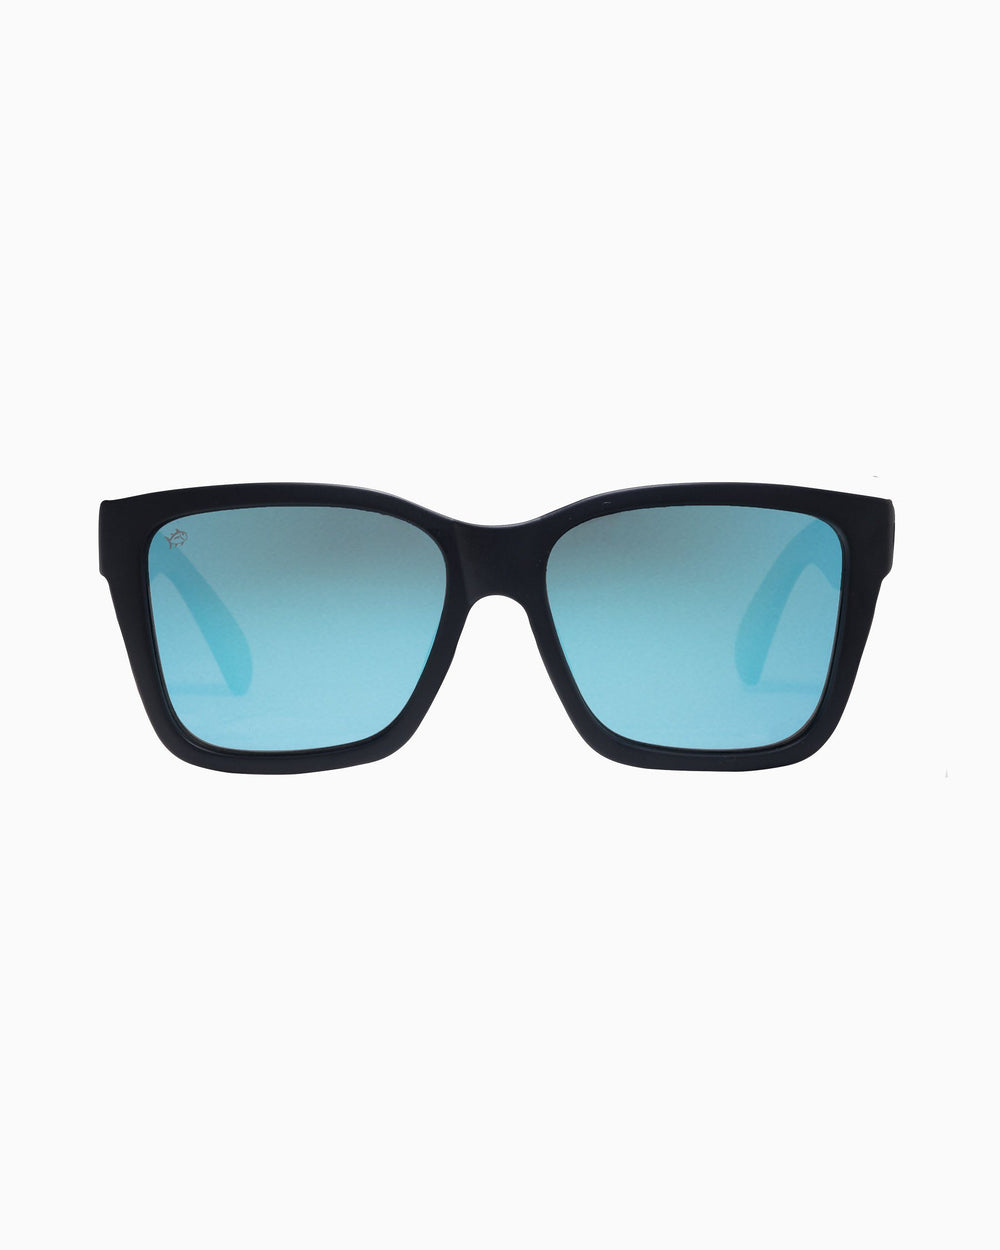 The front of the Rheos Edistos Sunglasses by Southern Tide - Gunmetal Marine